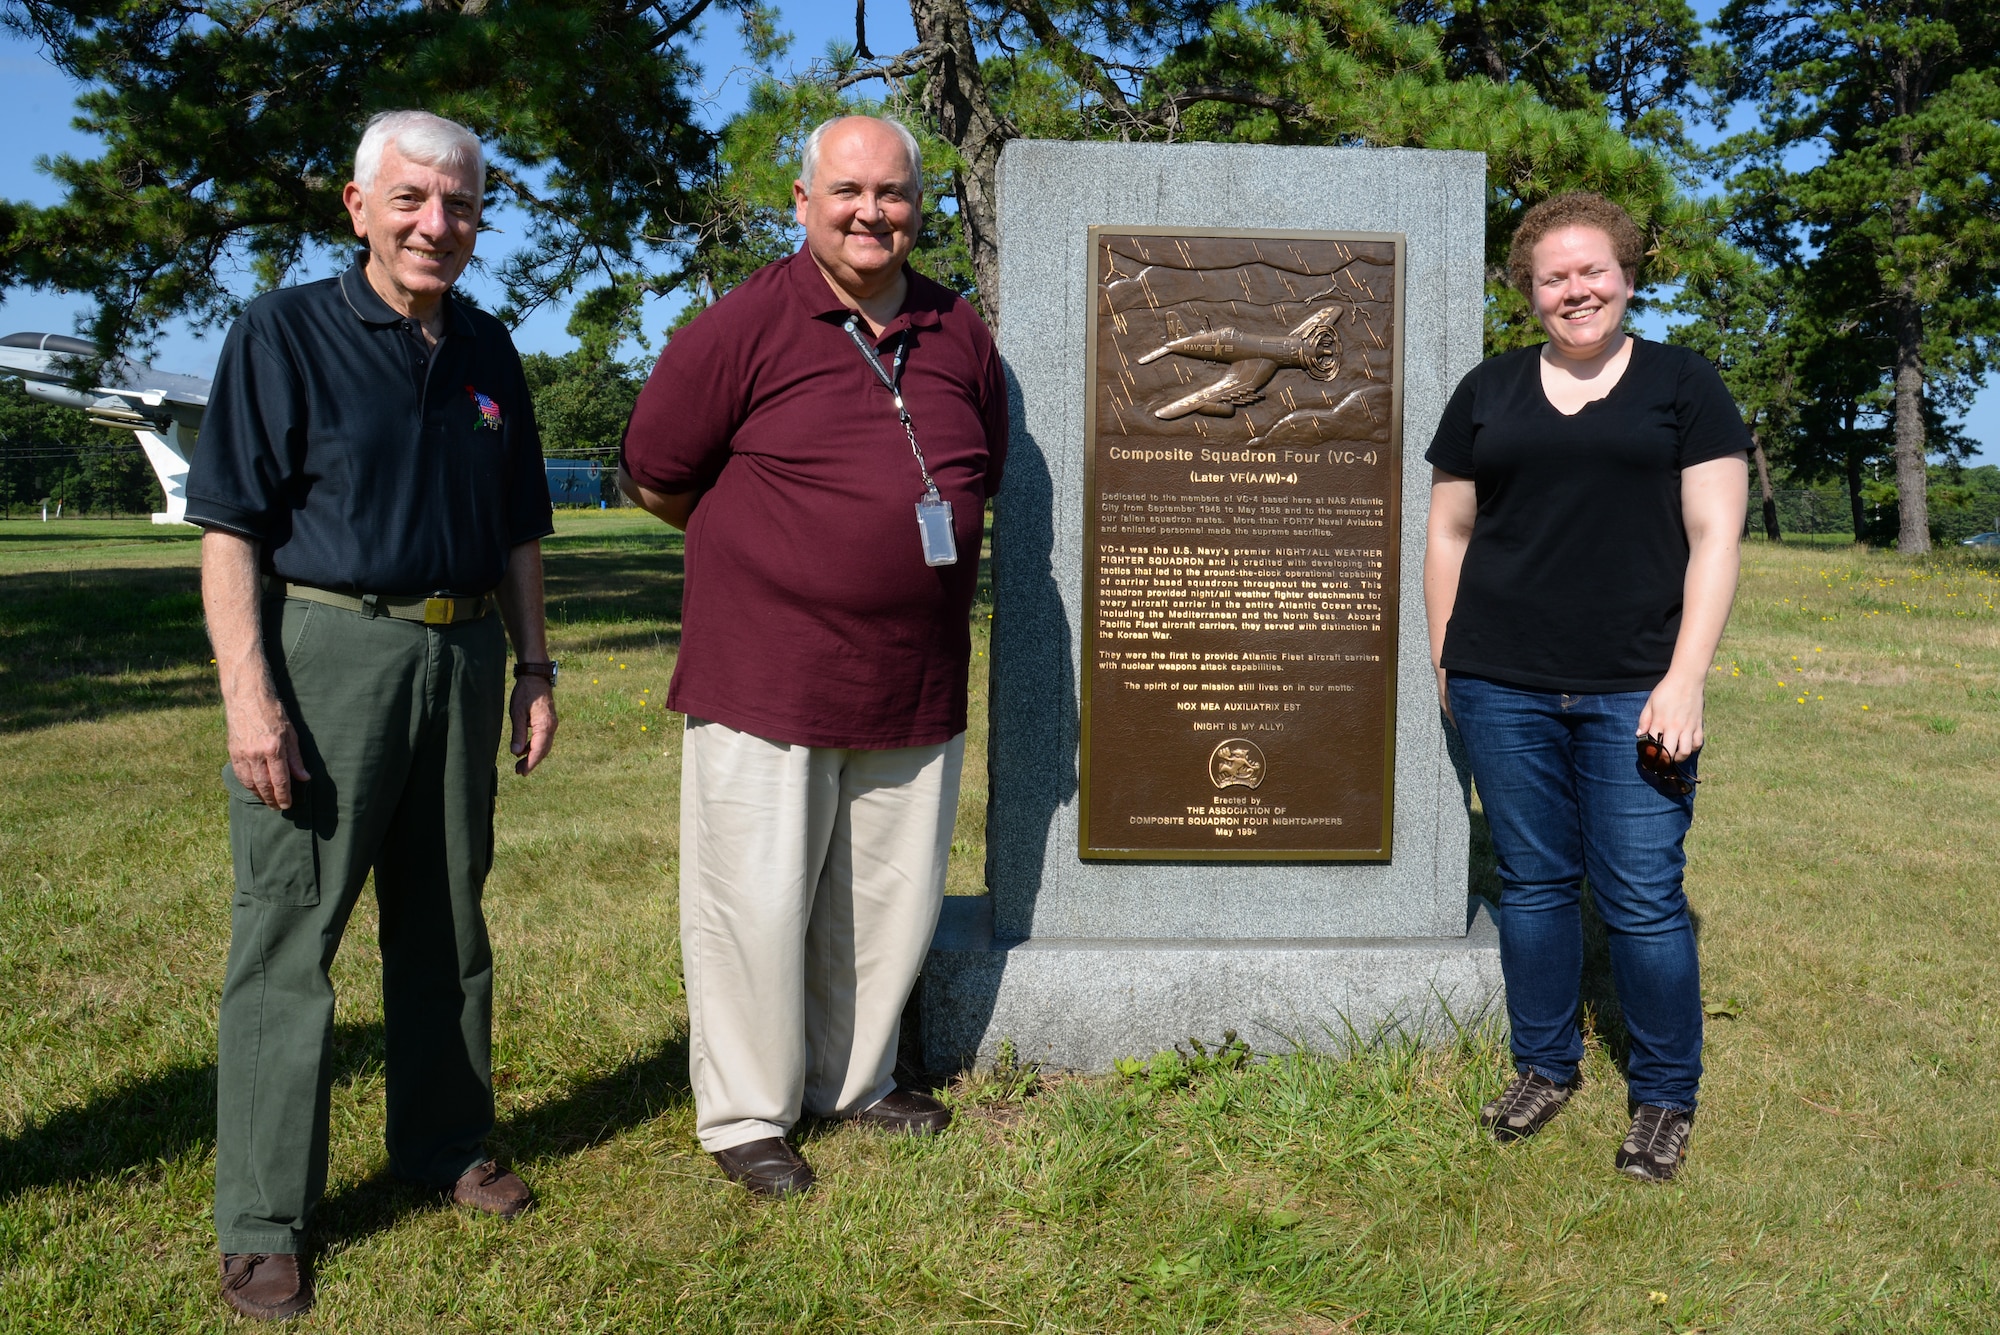 A picture of Melissa Swanson, Naval History and Heritage Command Conservator, Stan Ciurczak, Management and Program Analyst with the FAA William J. Hughes Technical Center, and Dr. Richard Porcelli, local aviation historian, posing for a photo in front of a U.S. Navy VC-4 memorial marker.